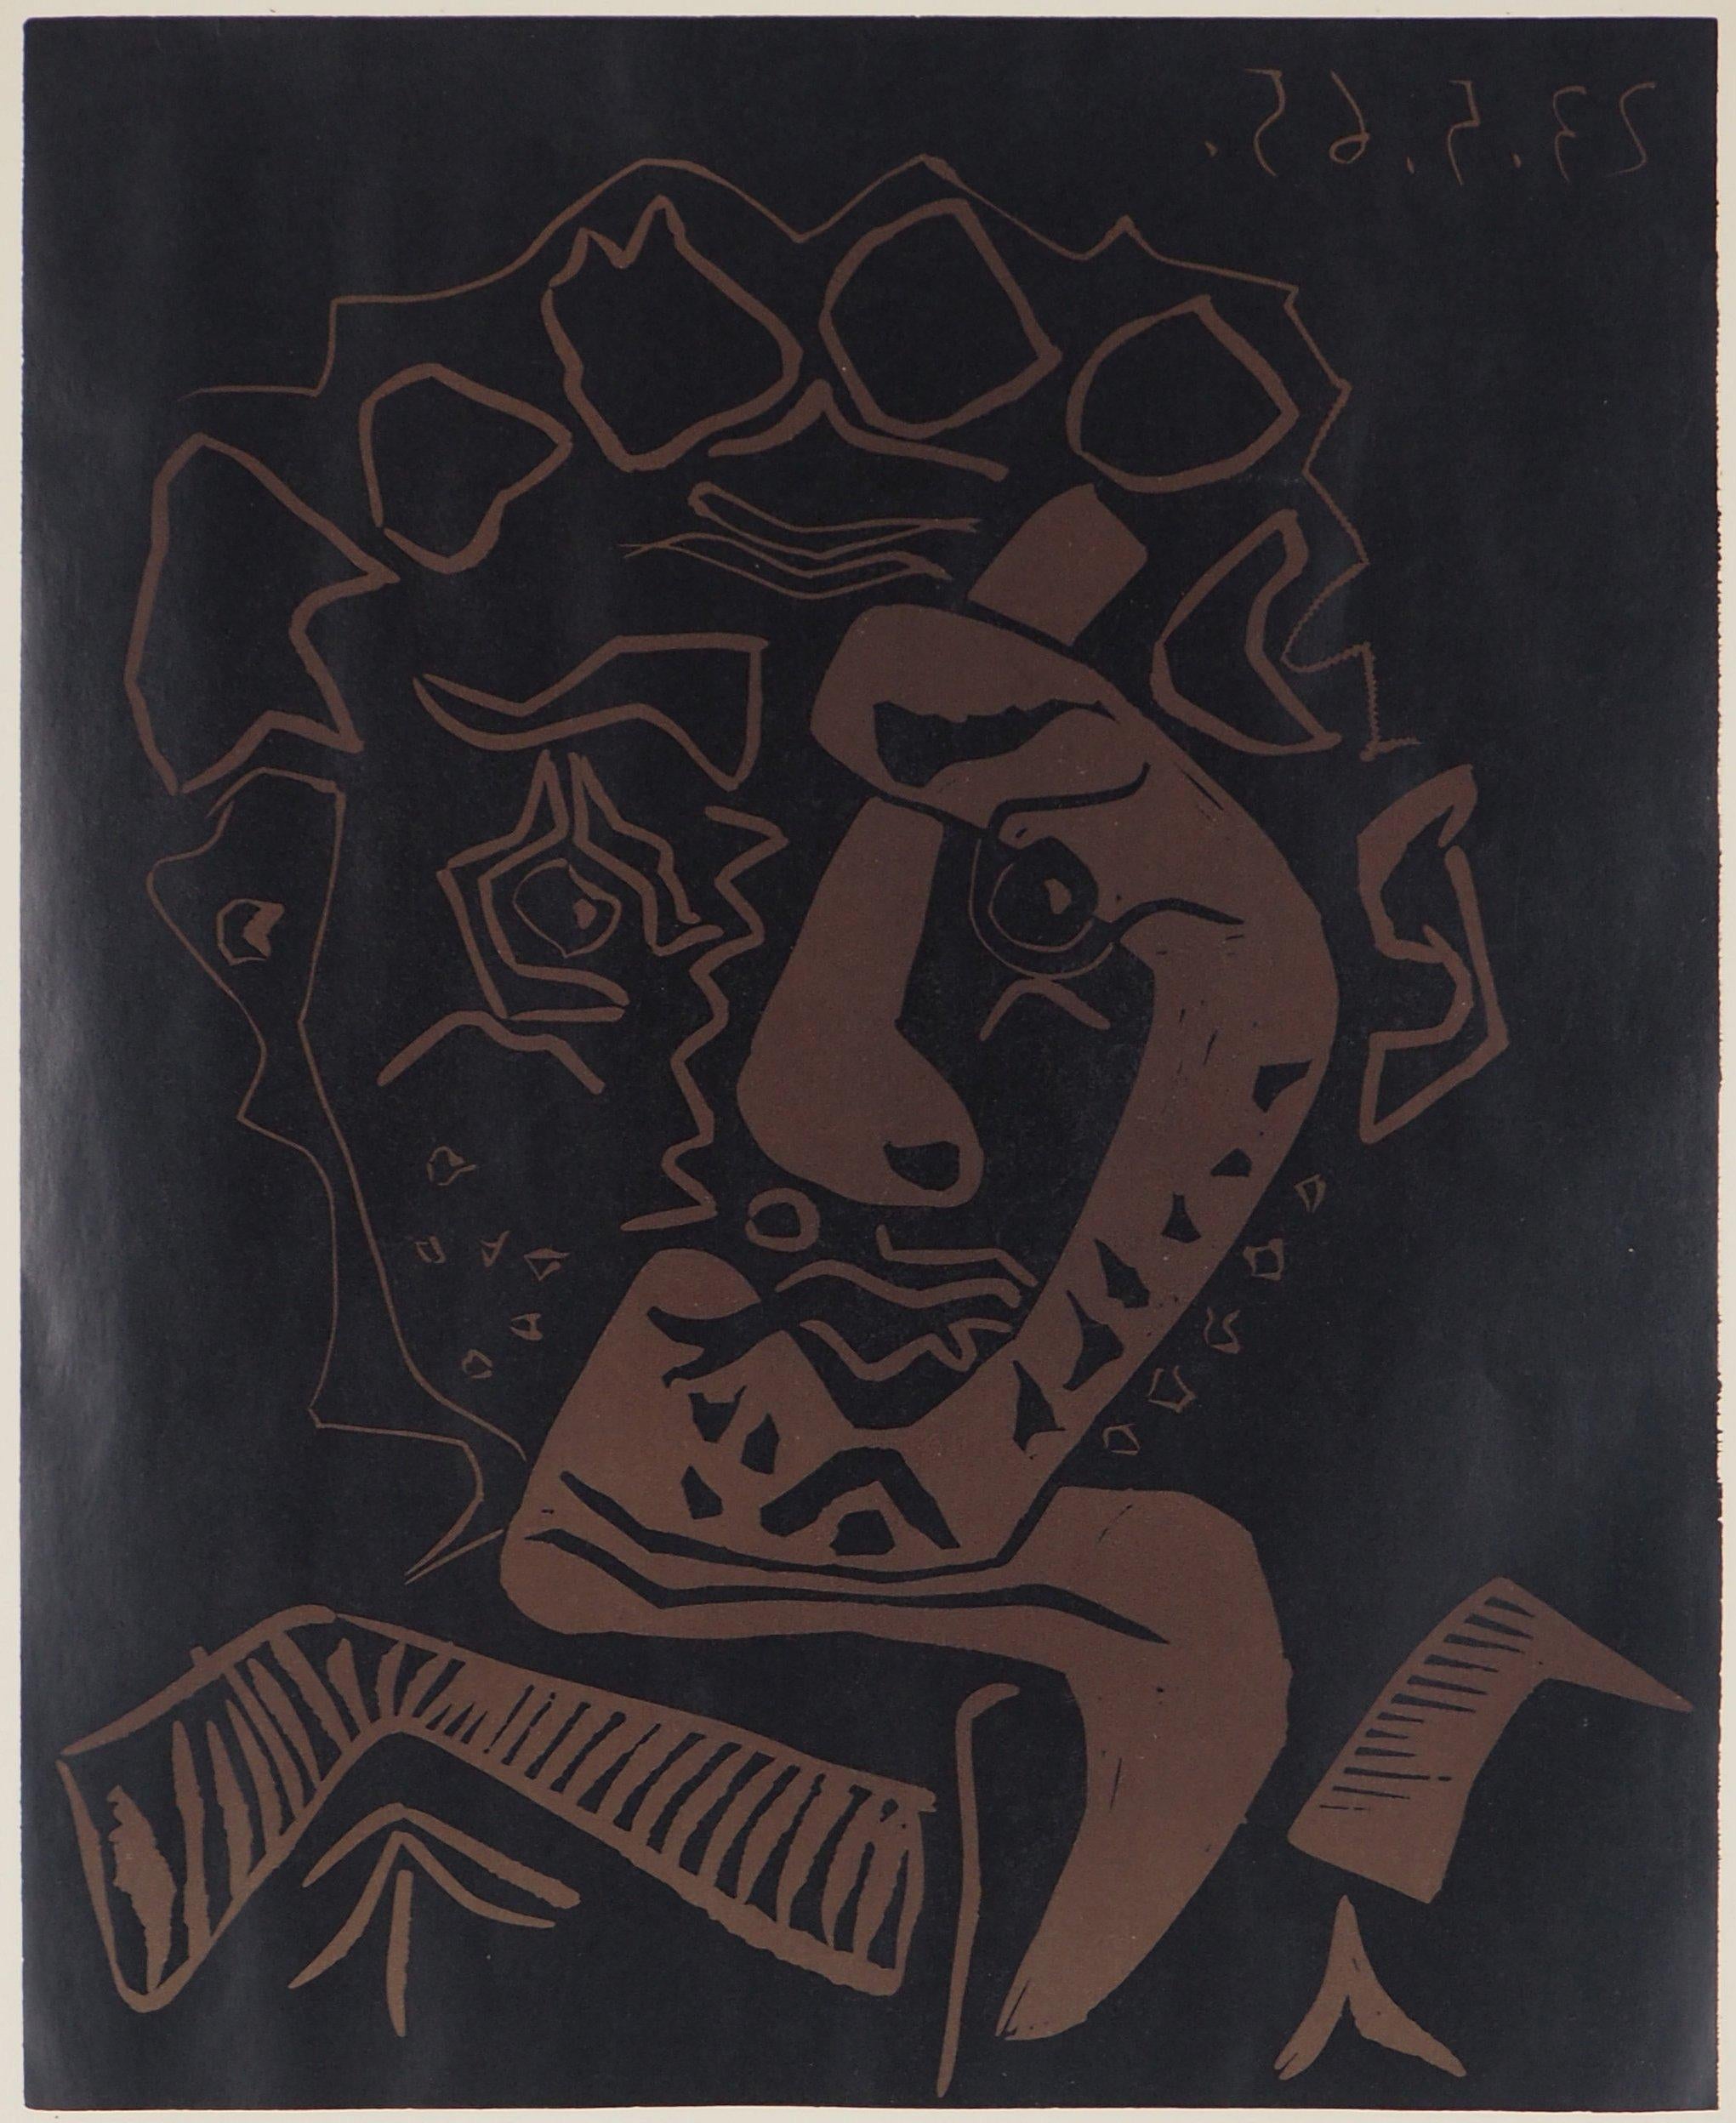 Histrion Head (Picasso and Theater) - Linocut, 1965 (ref. Czwiklitzer #22) - Cubist Print by (after) Pablo Picasso